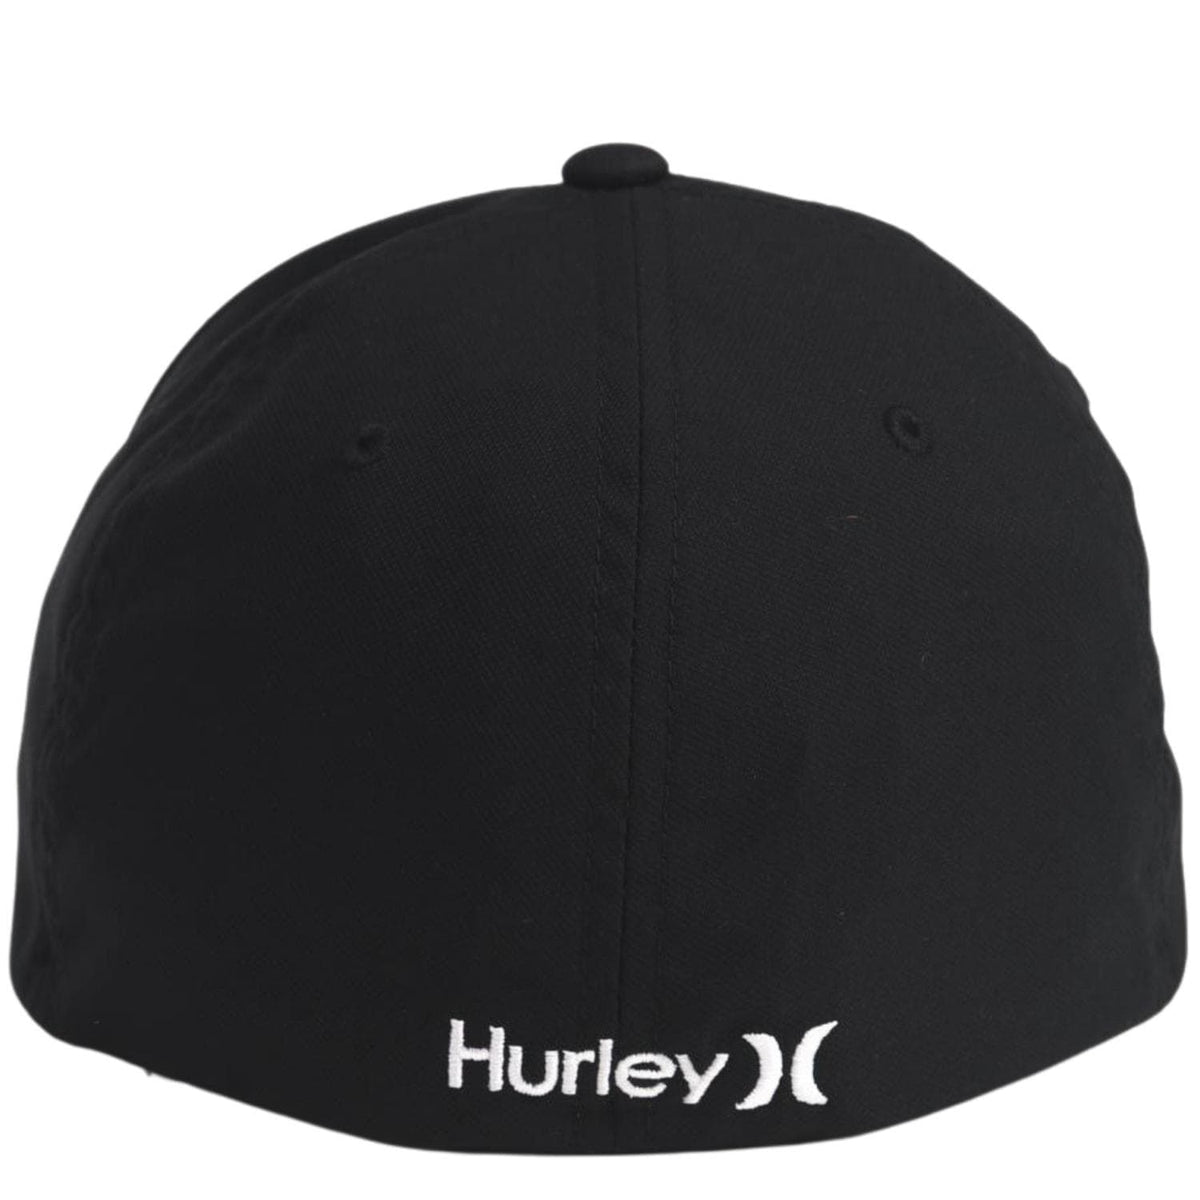 Hurley H2O Dri-Fit One And Only Baseball Cap - Black/(White) - Baseball Cap by Hurley